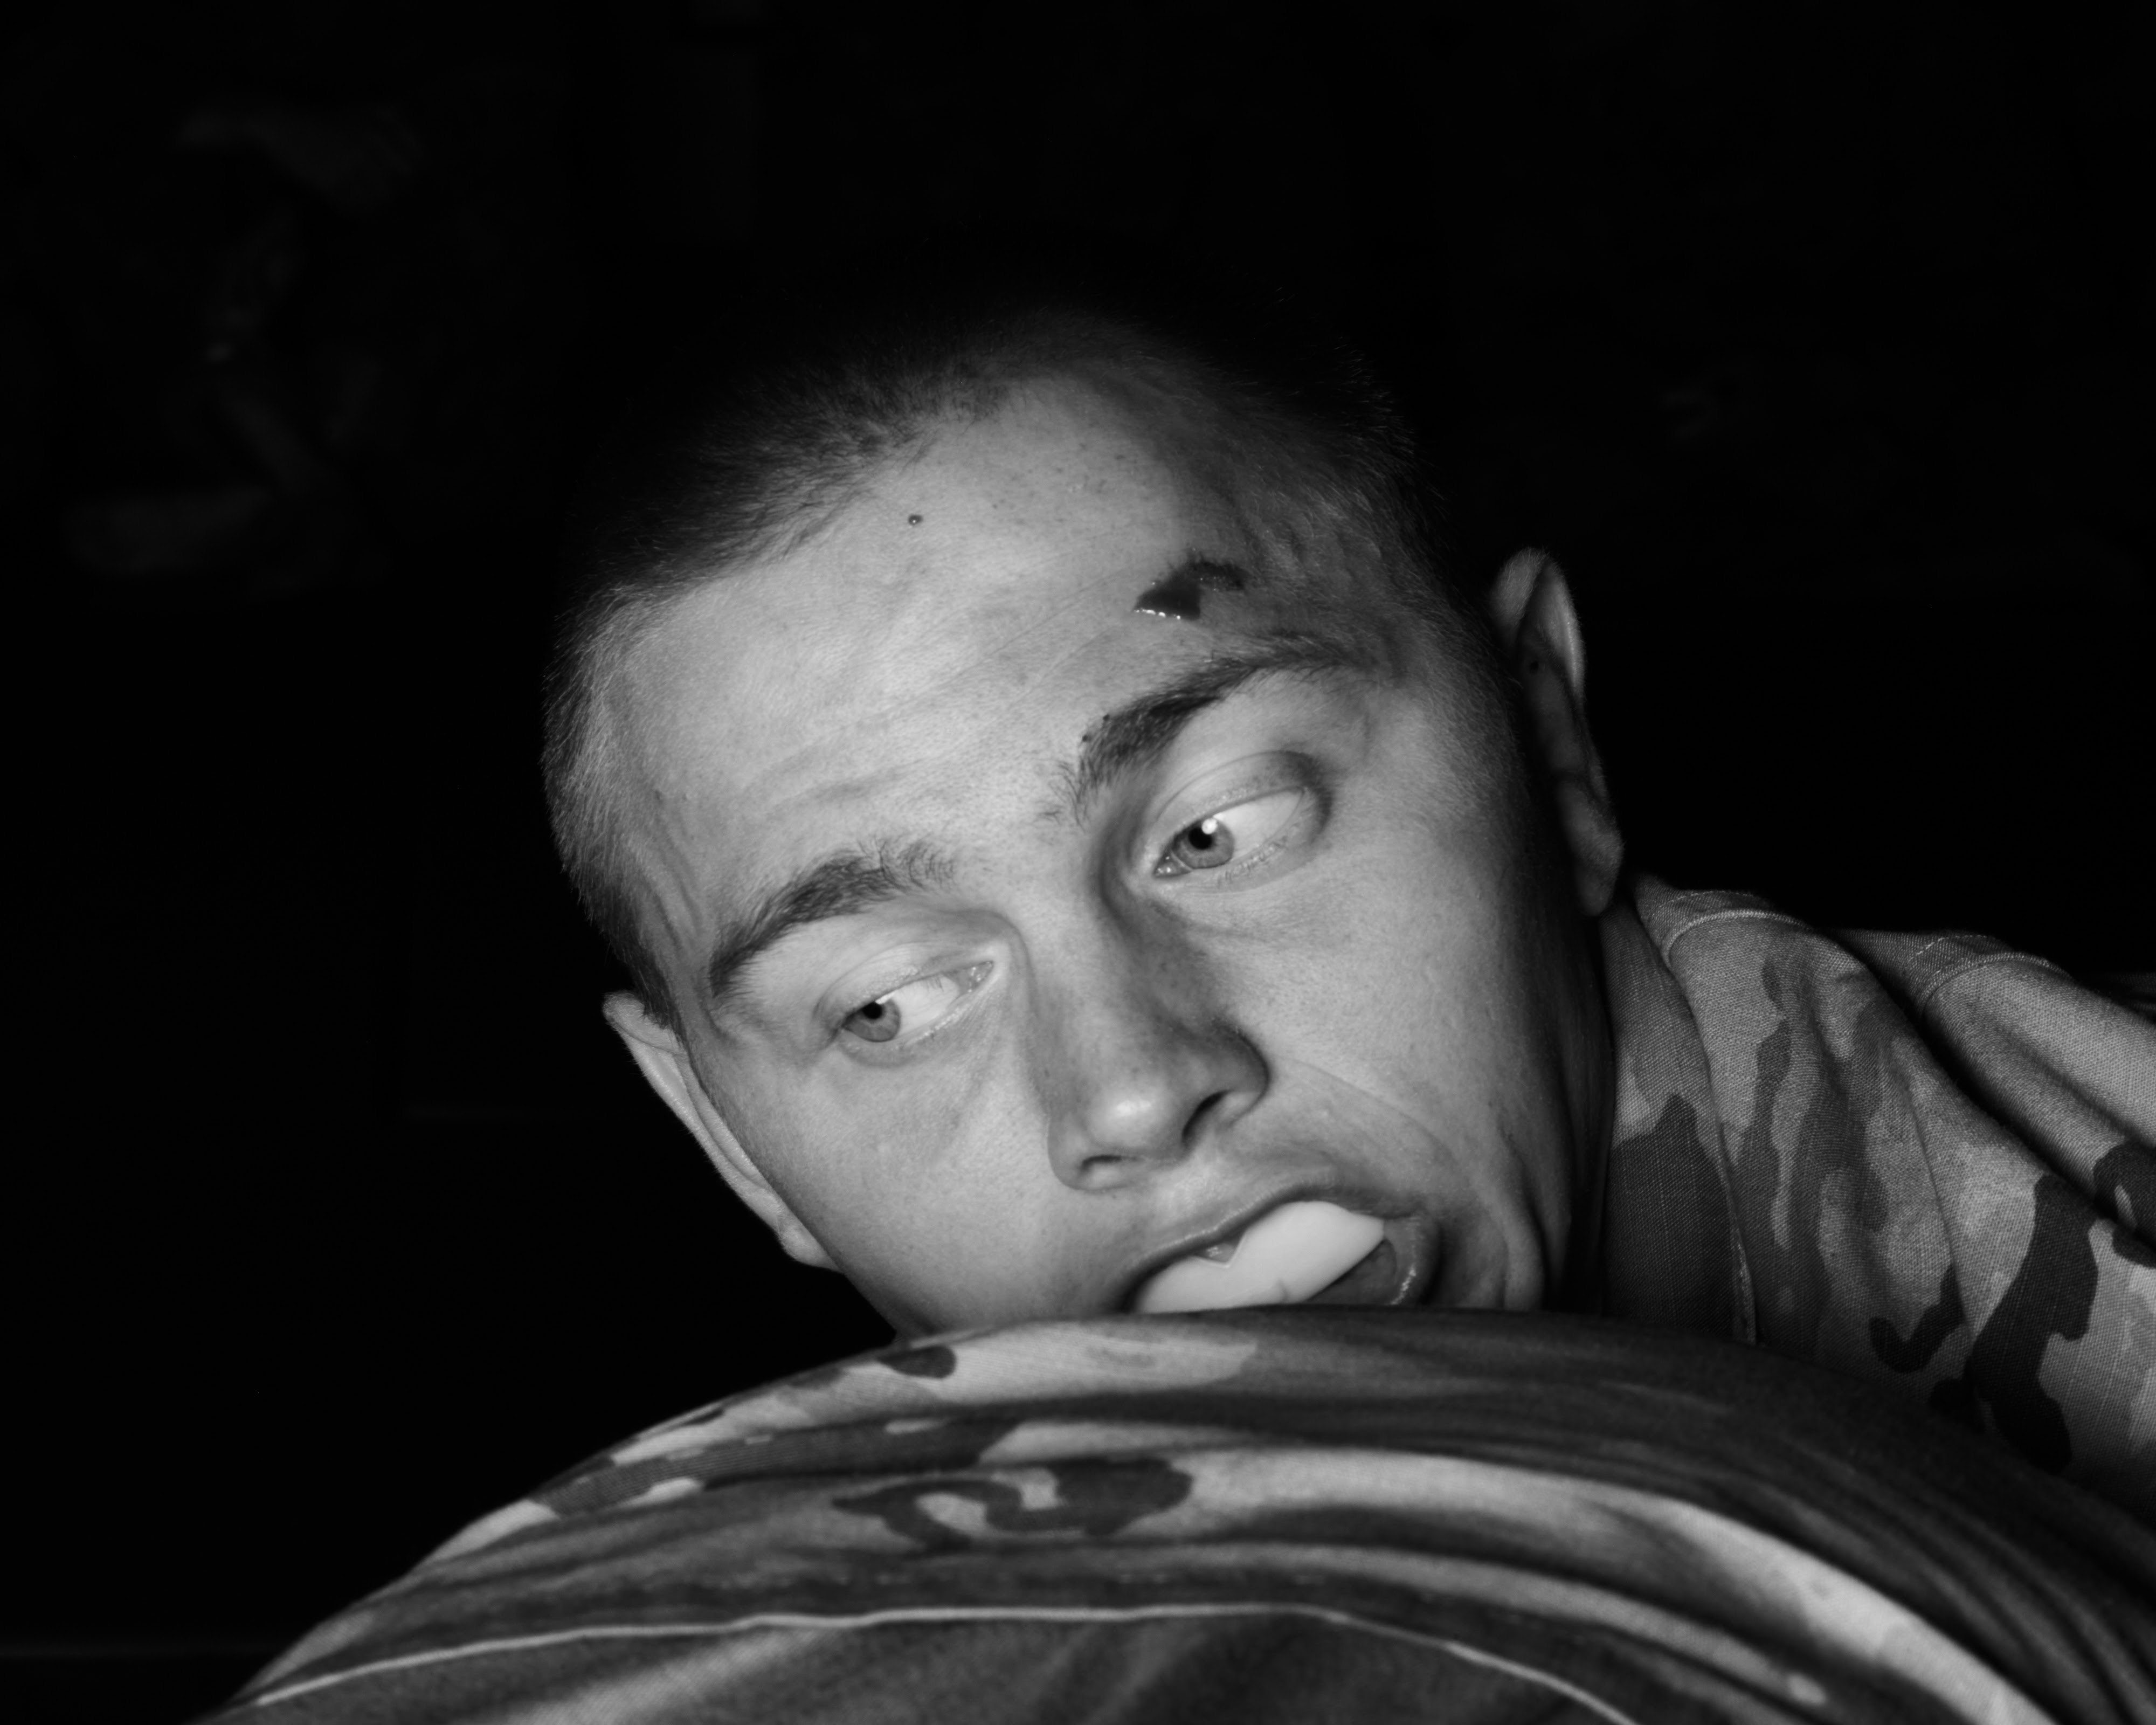 A soldier's face during hand-to-combat fighting